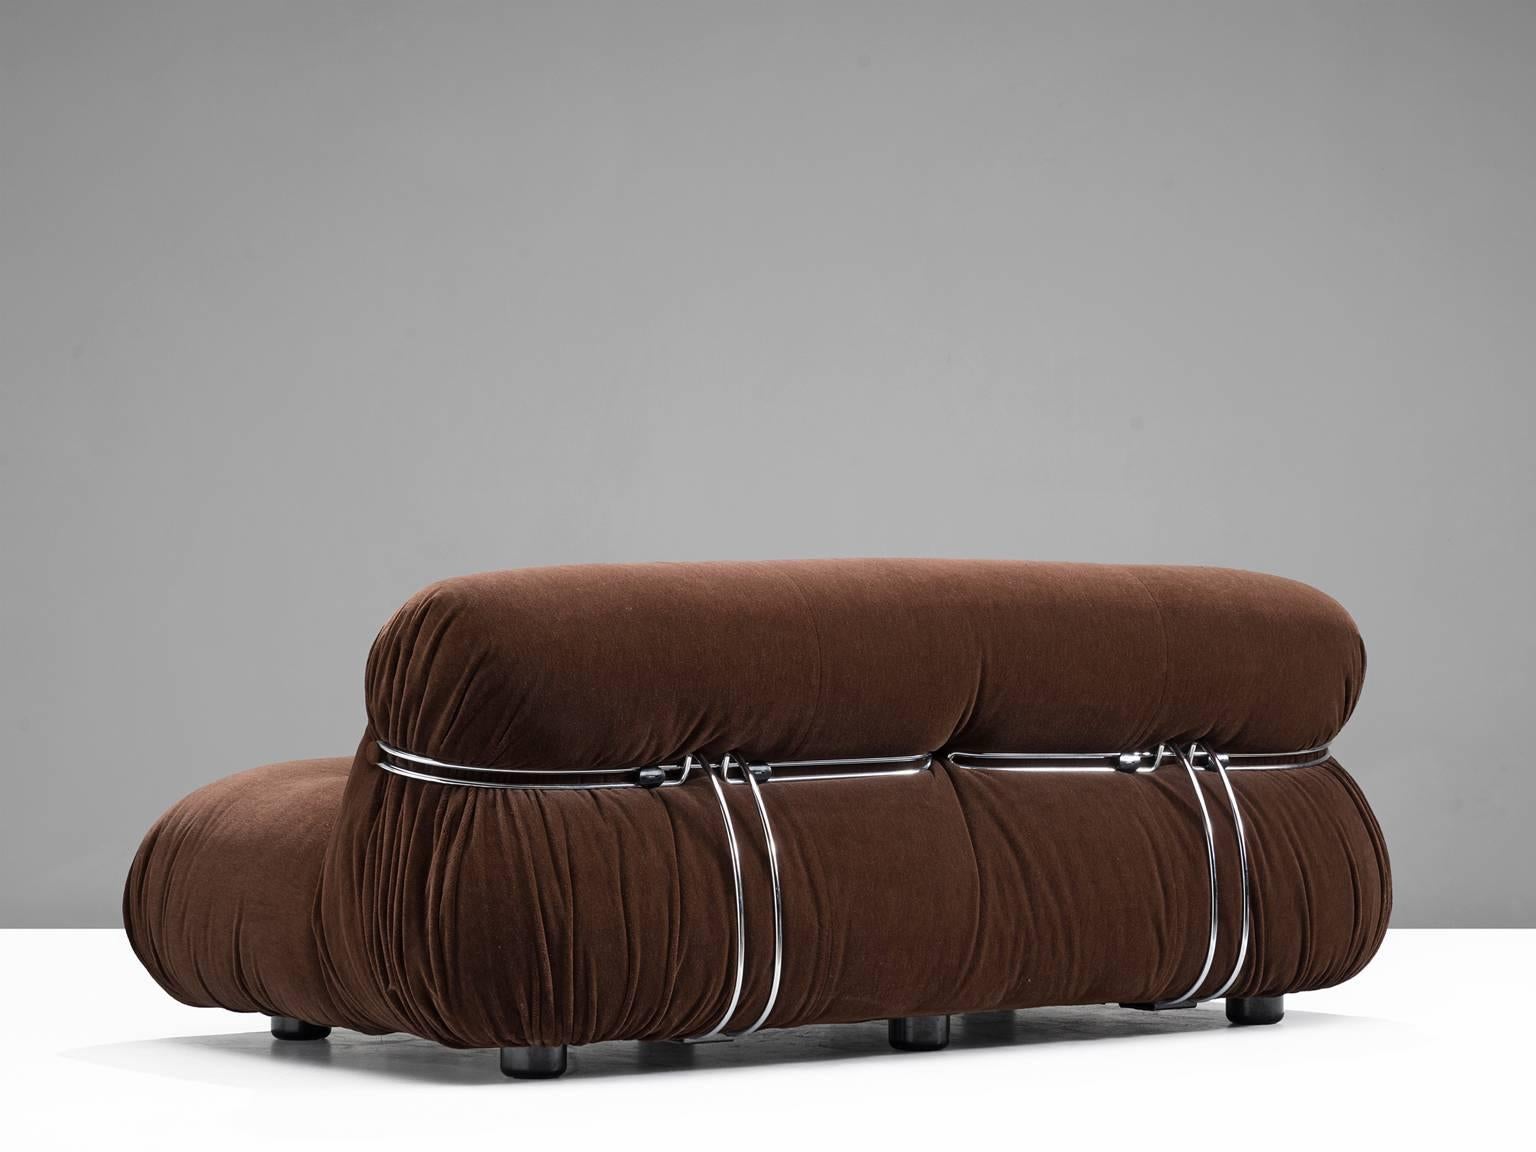 'Soriana' lounge chair and ottoman, in fabric and metal, by Afra & Tobia Scarpa for Cassina, Italy, 1969. 

Iconic sofa by Italian designer couple Afra & Tobia Scarpa, the Soriana proposes a model that institutionalizes the image of the